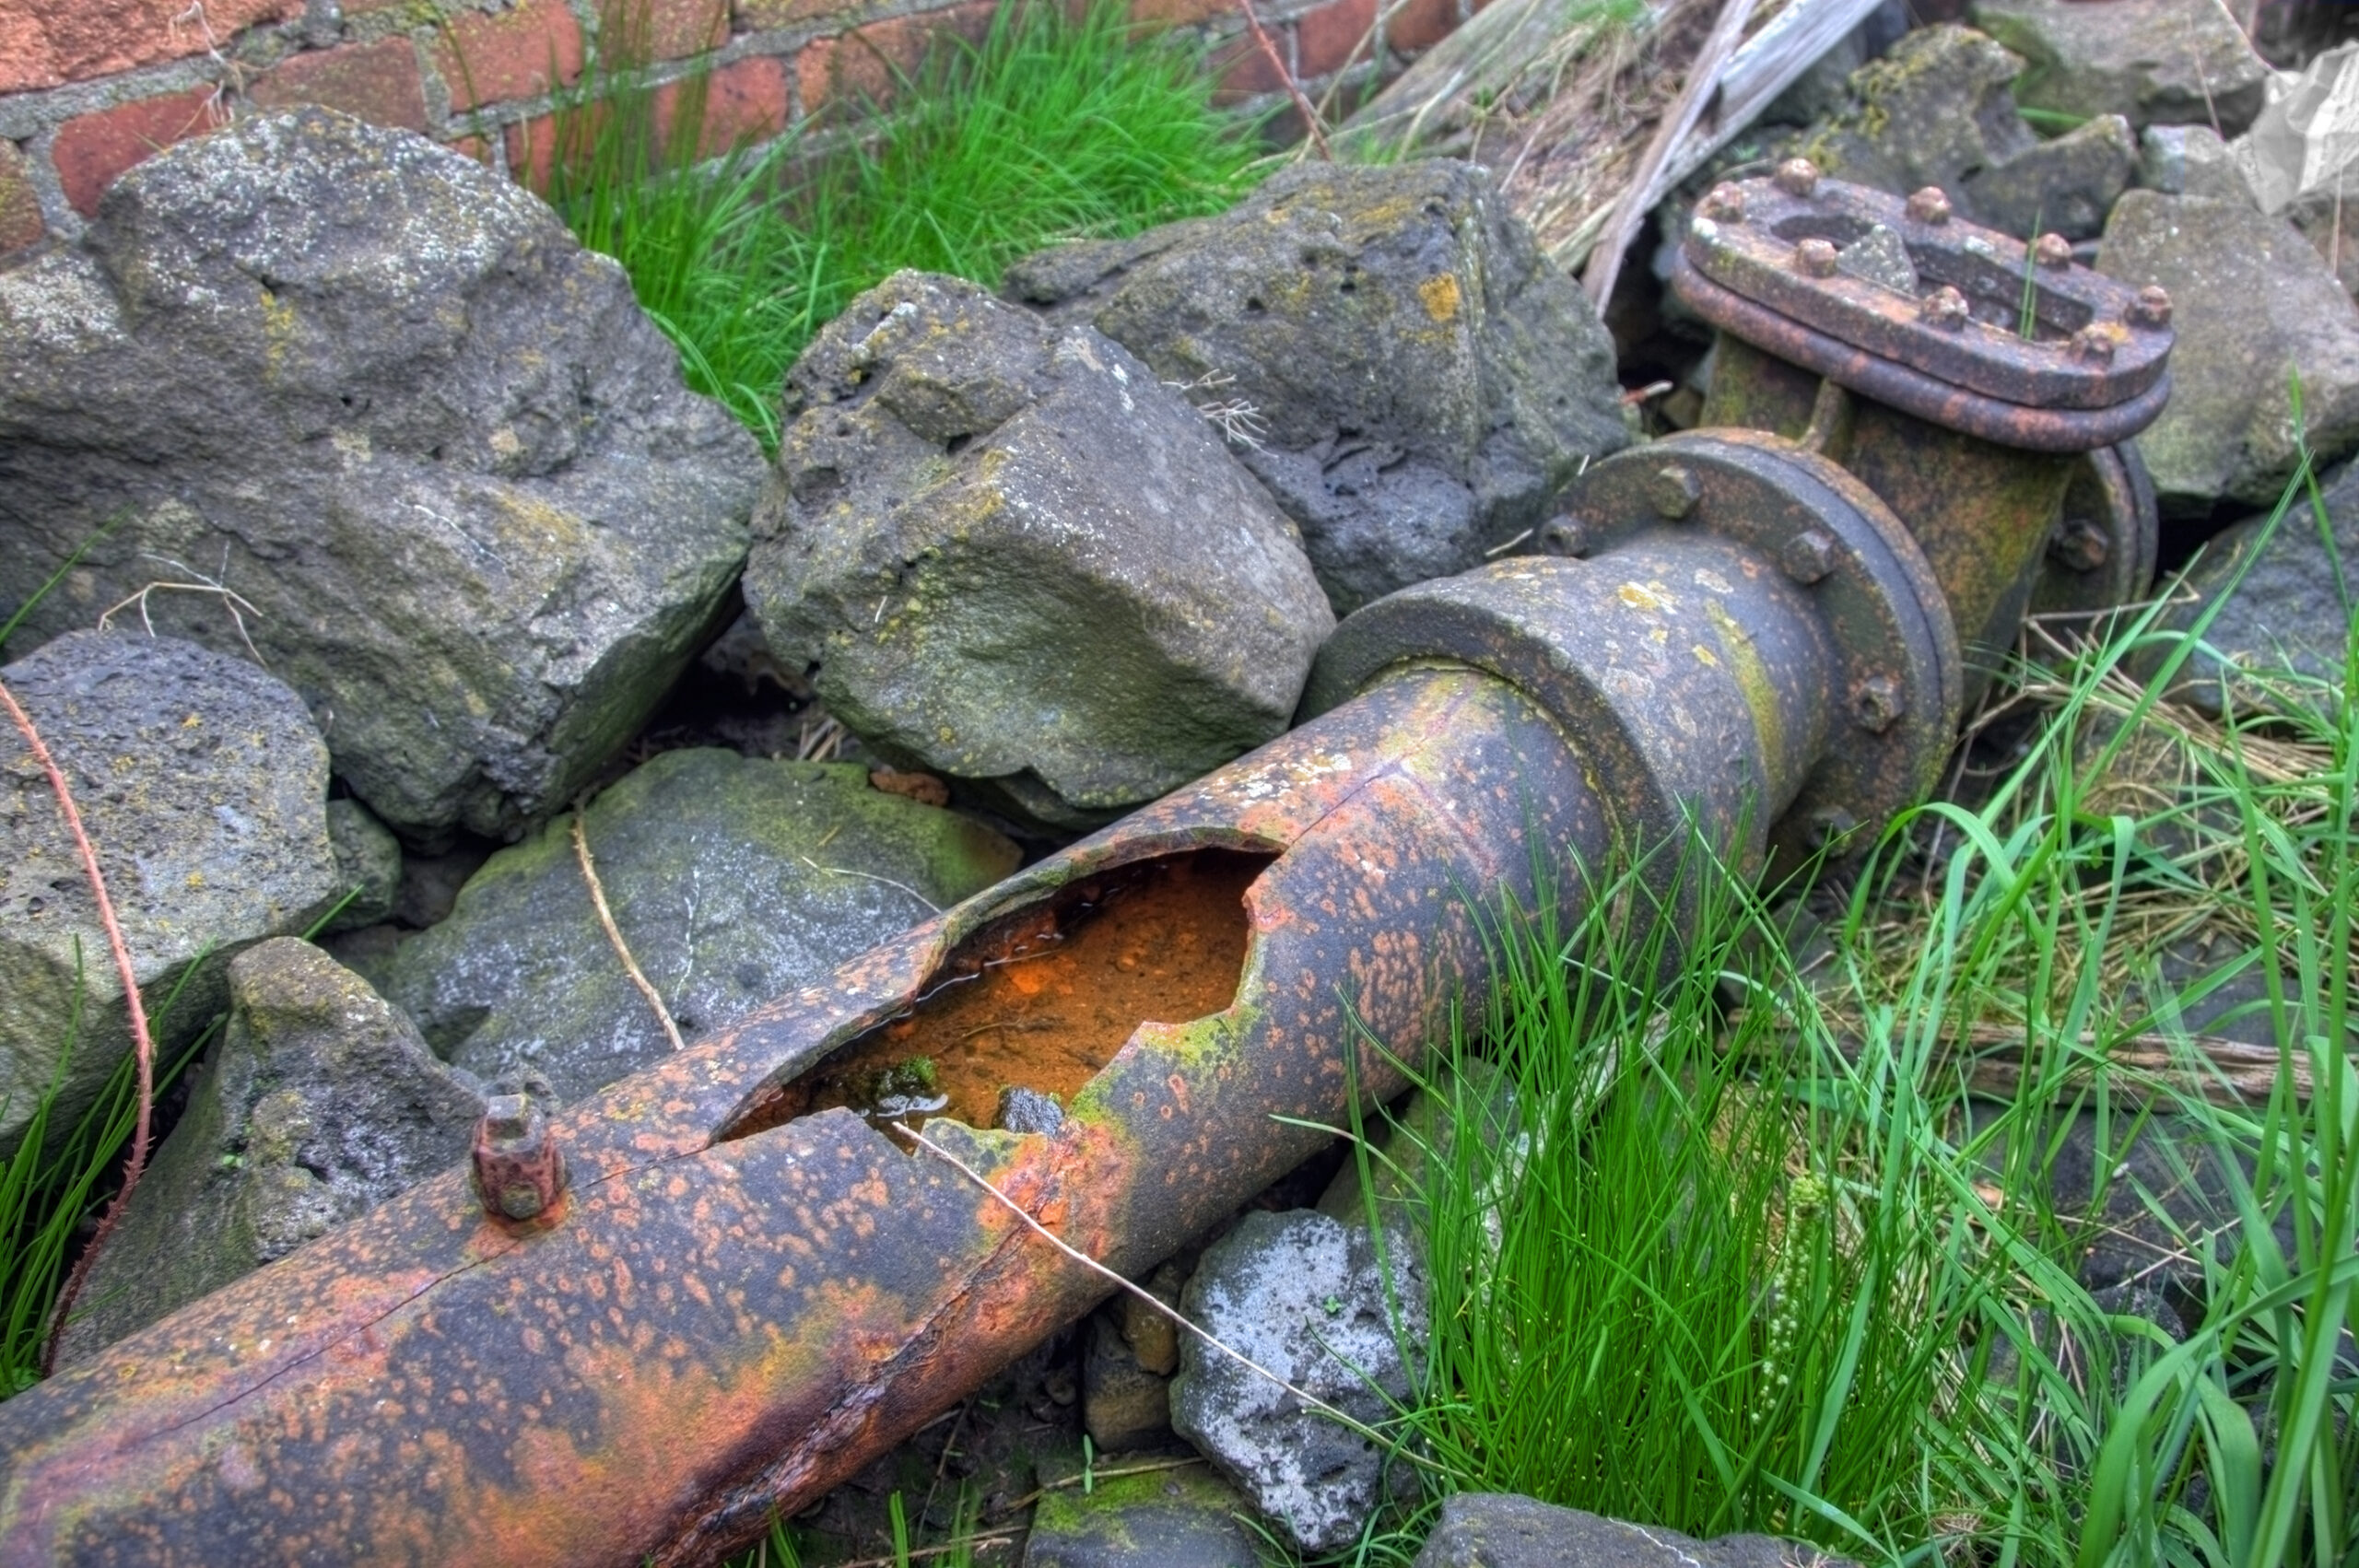 Common Causes of Cracked Pipes